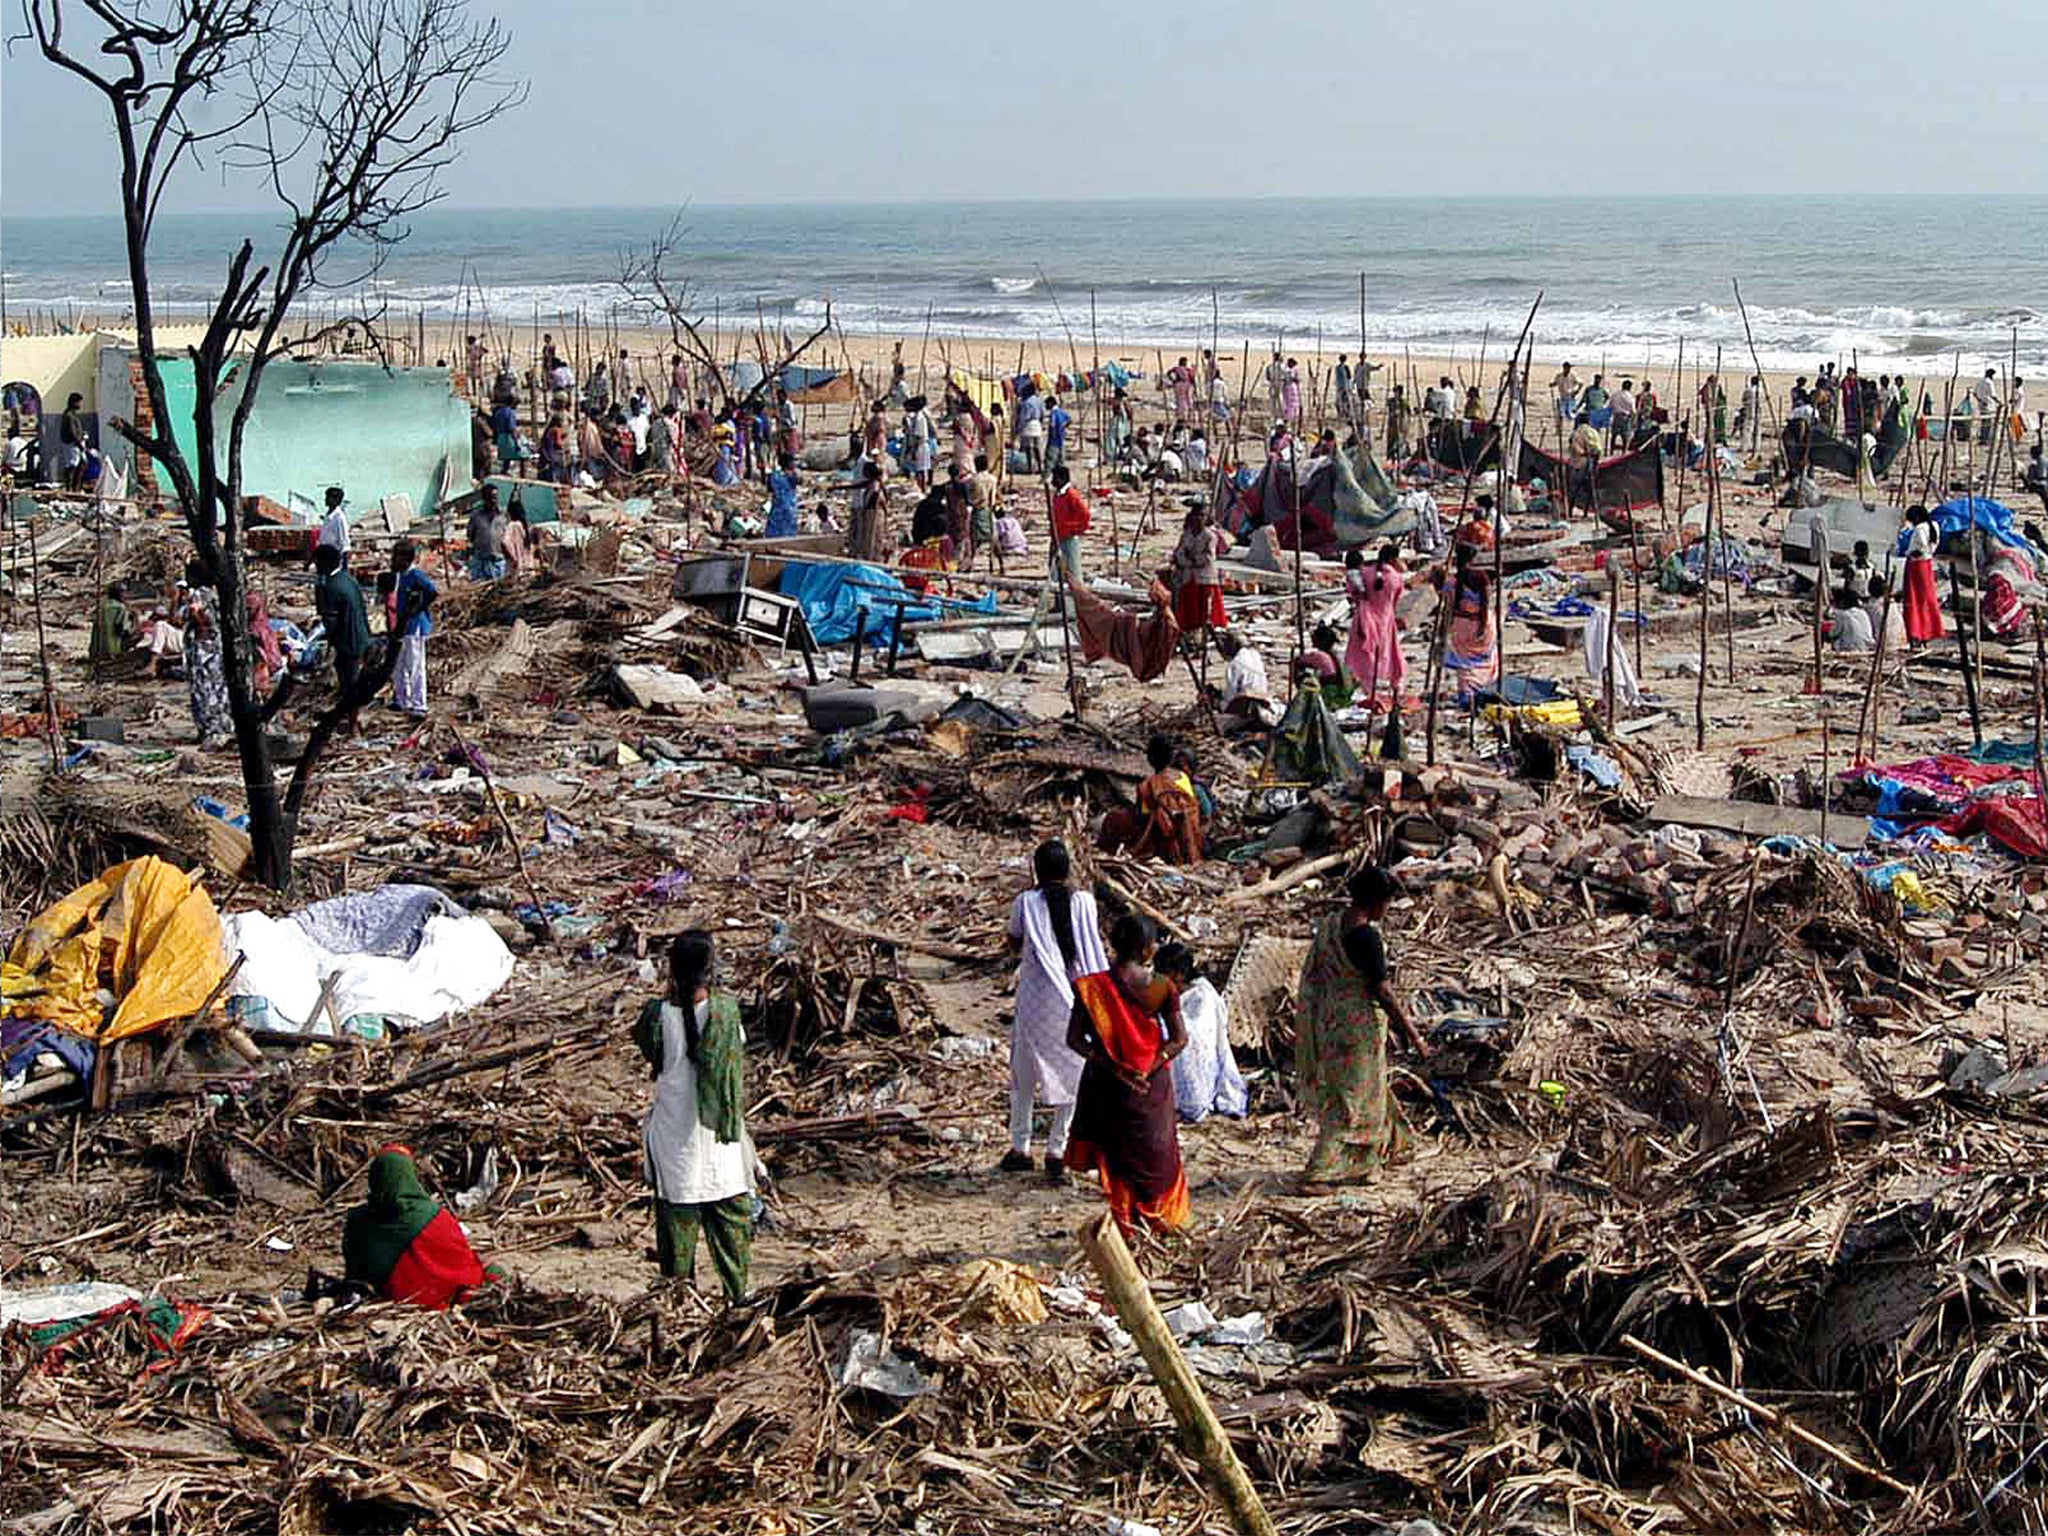 The DEC has organised some of the biggest aid campaigns in the world including for the Boxing Day tsunami in 2004